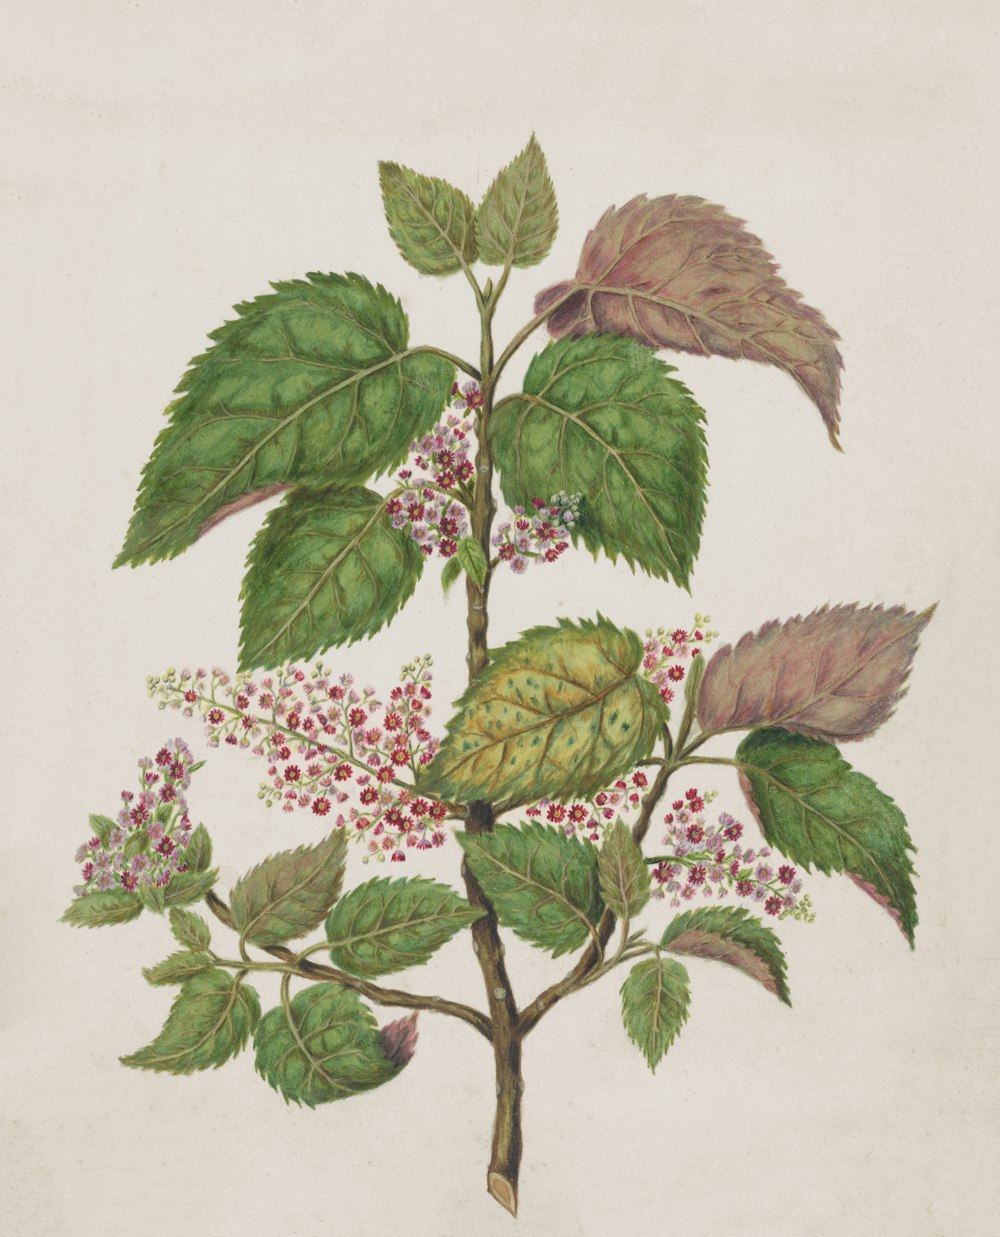 a drawing of a plant with leaves and berries